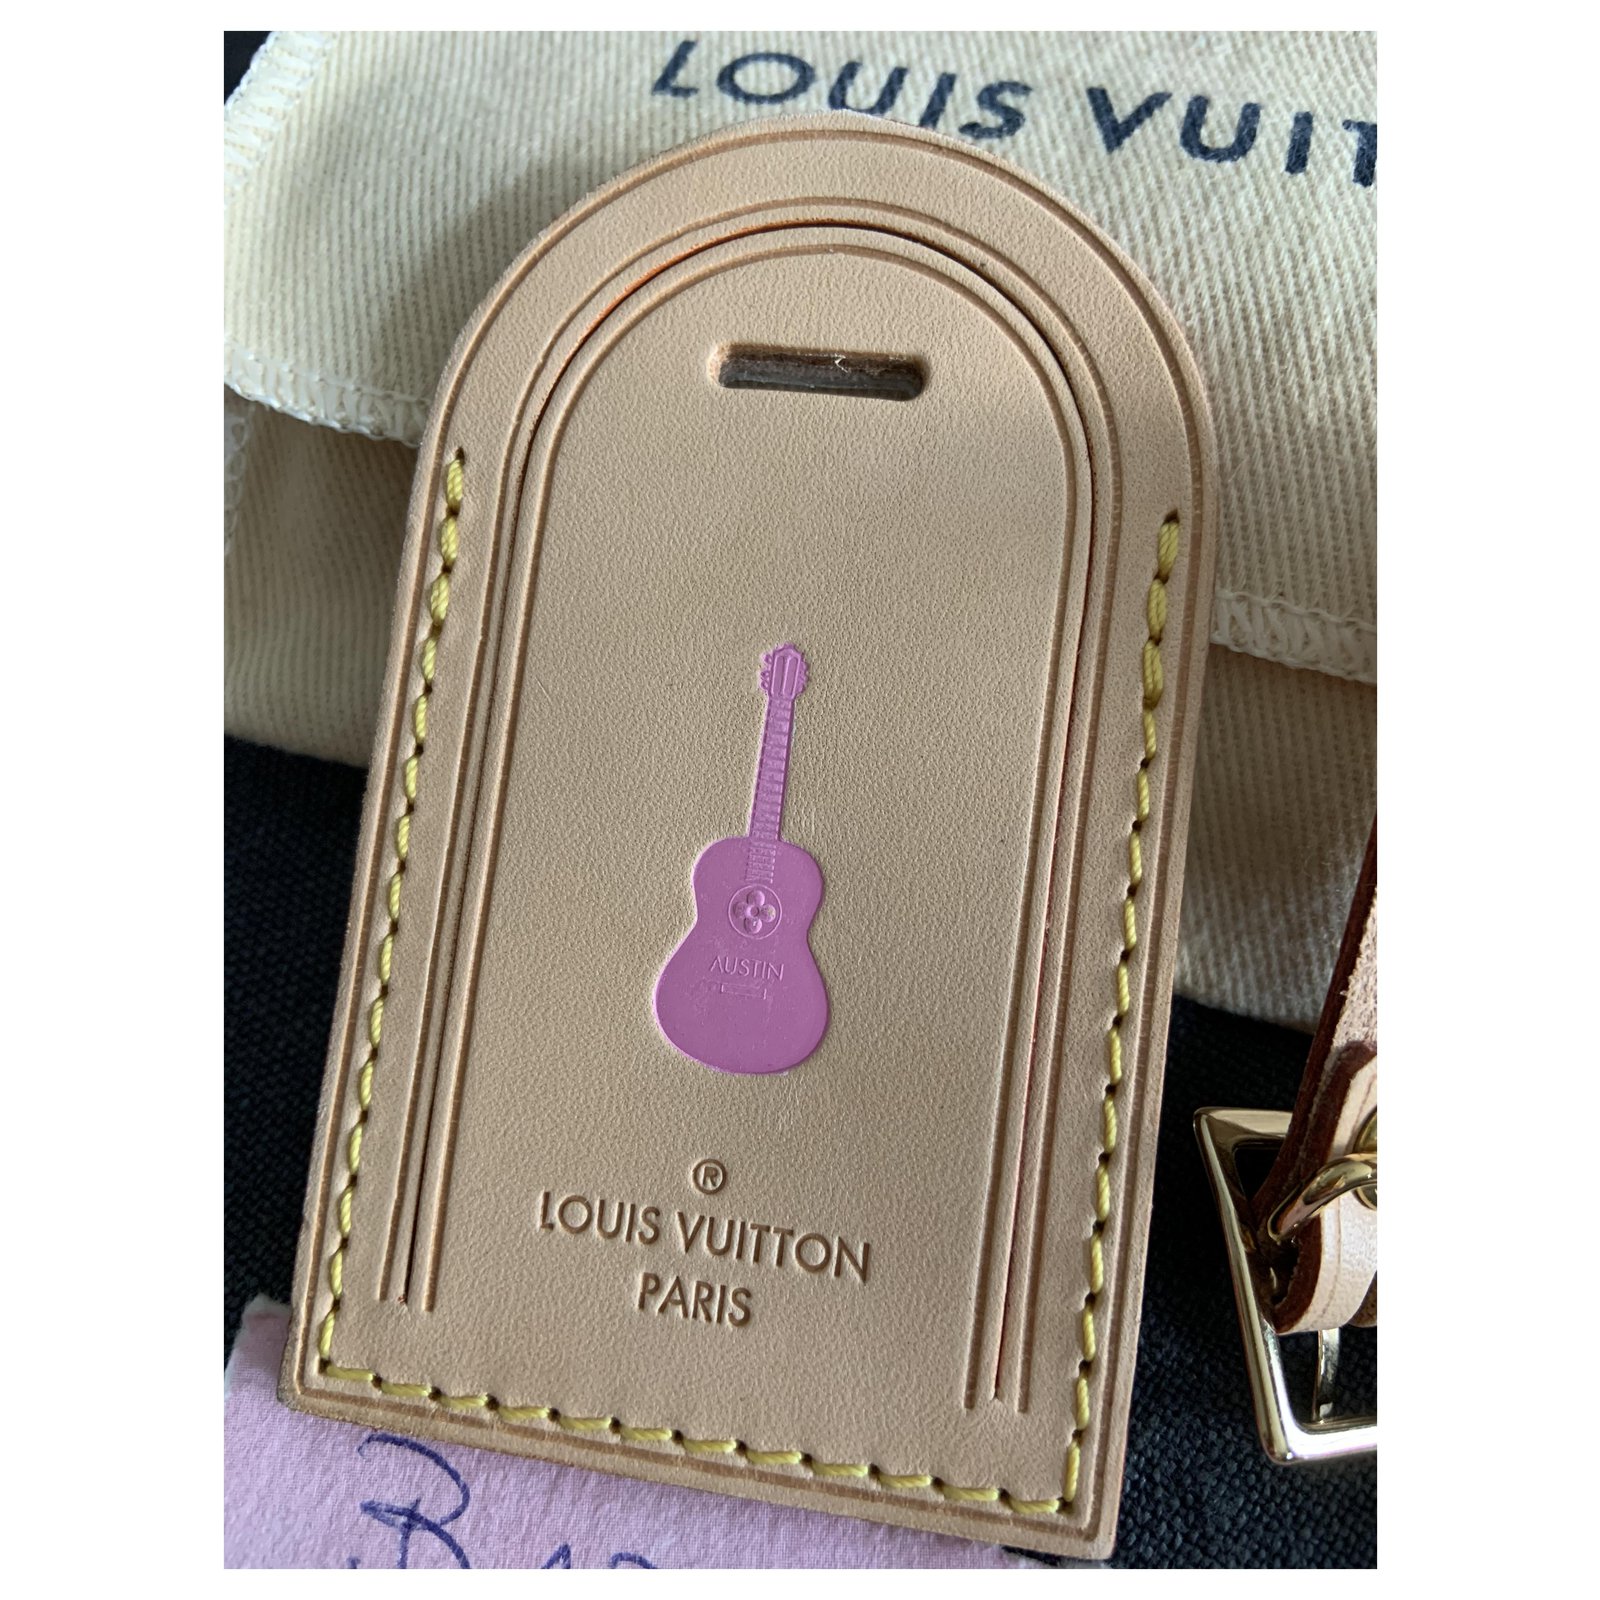 Louis Vuitton Vacchetta Luggage tag large size hot stamping